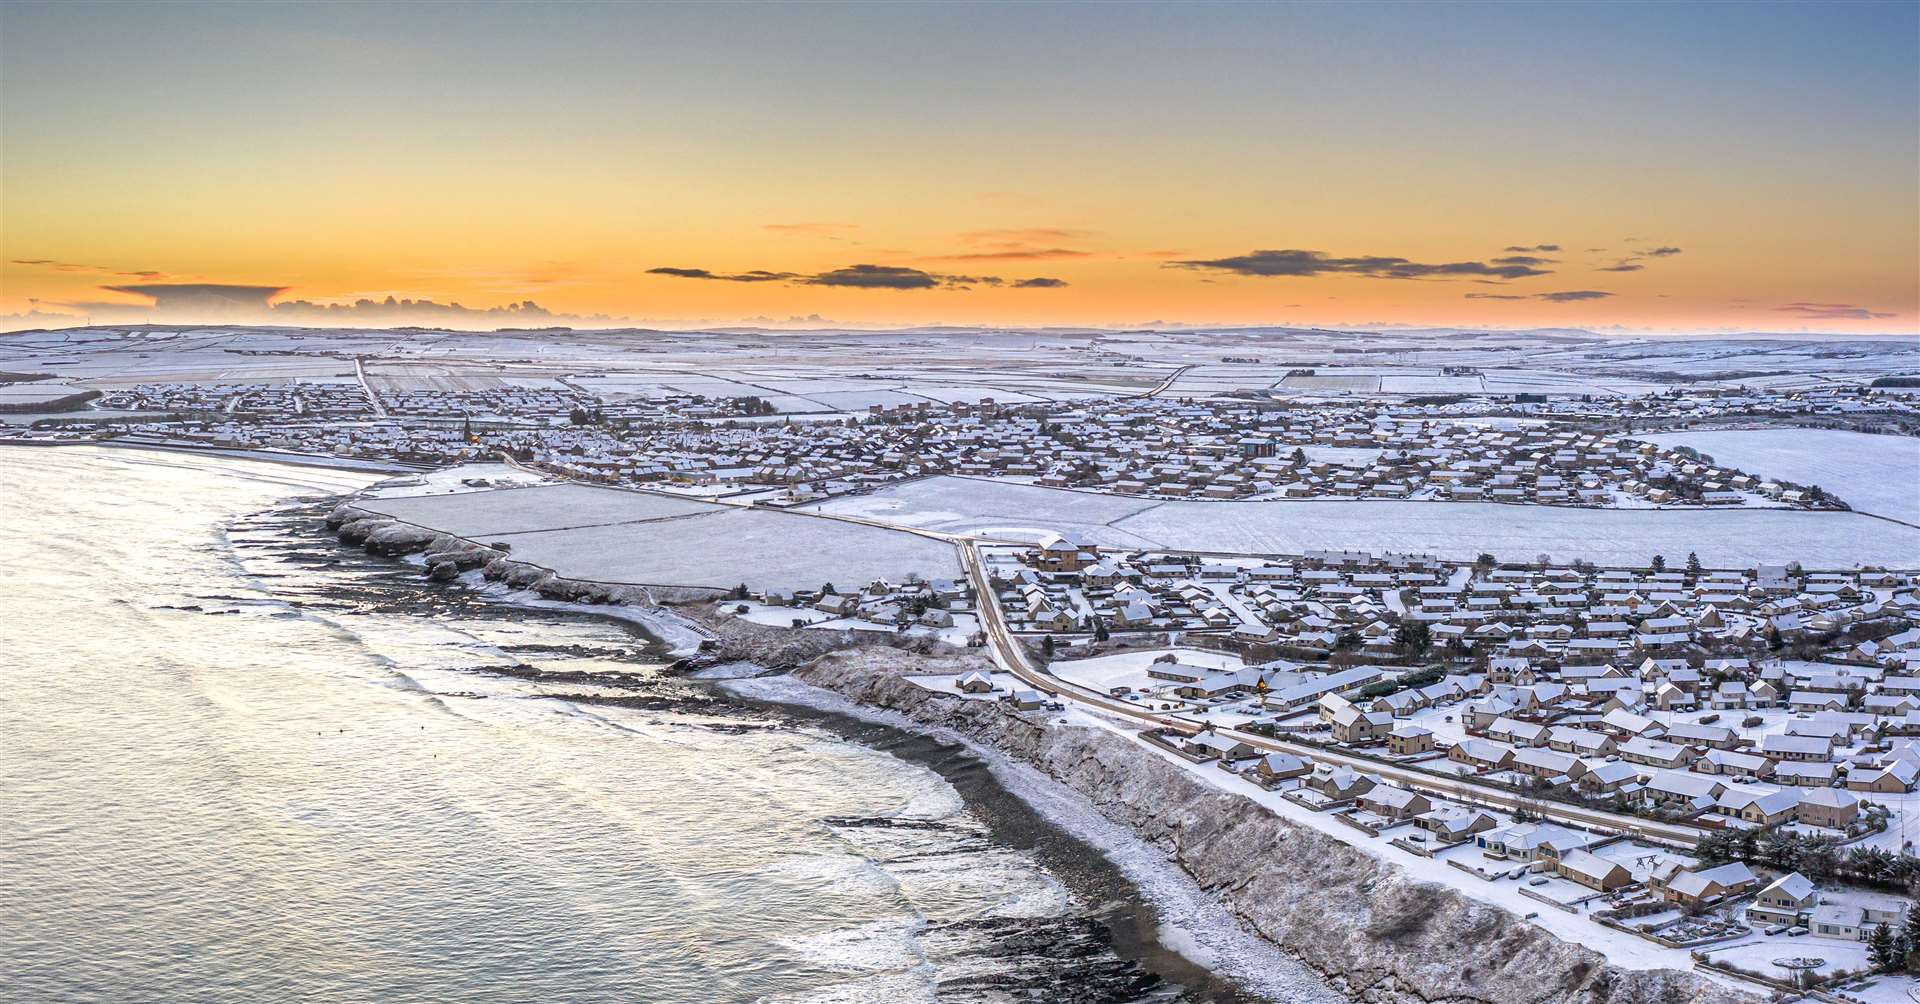 Thurso under a blanket of snow just before sunrise on Saturday in this drone image captured by local photographer Karen Munro.